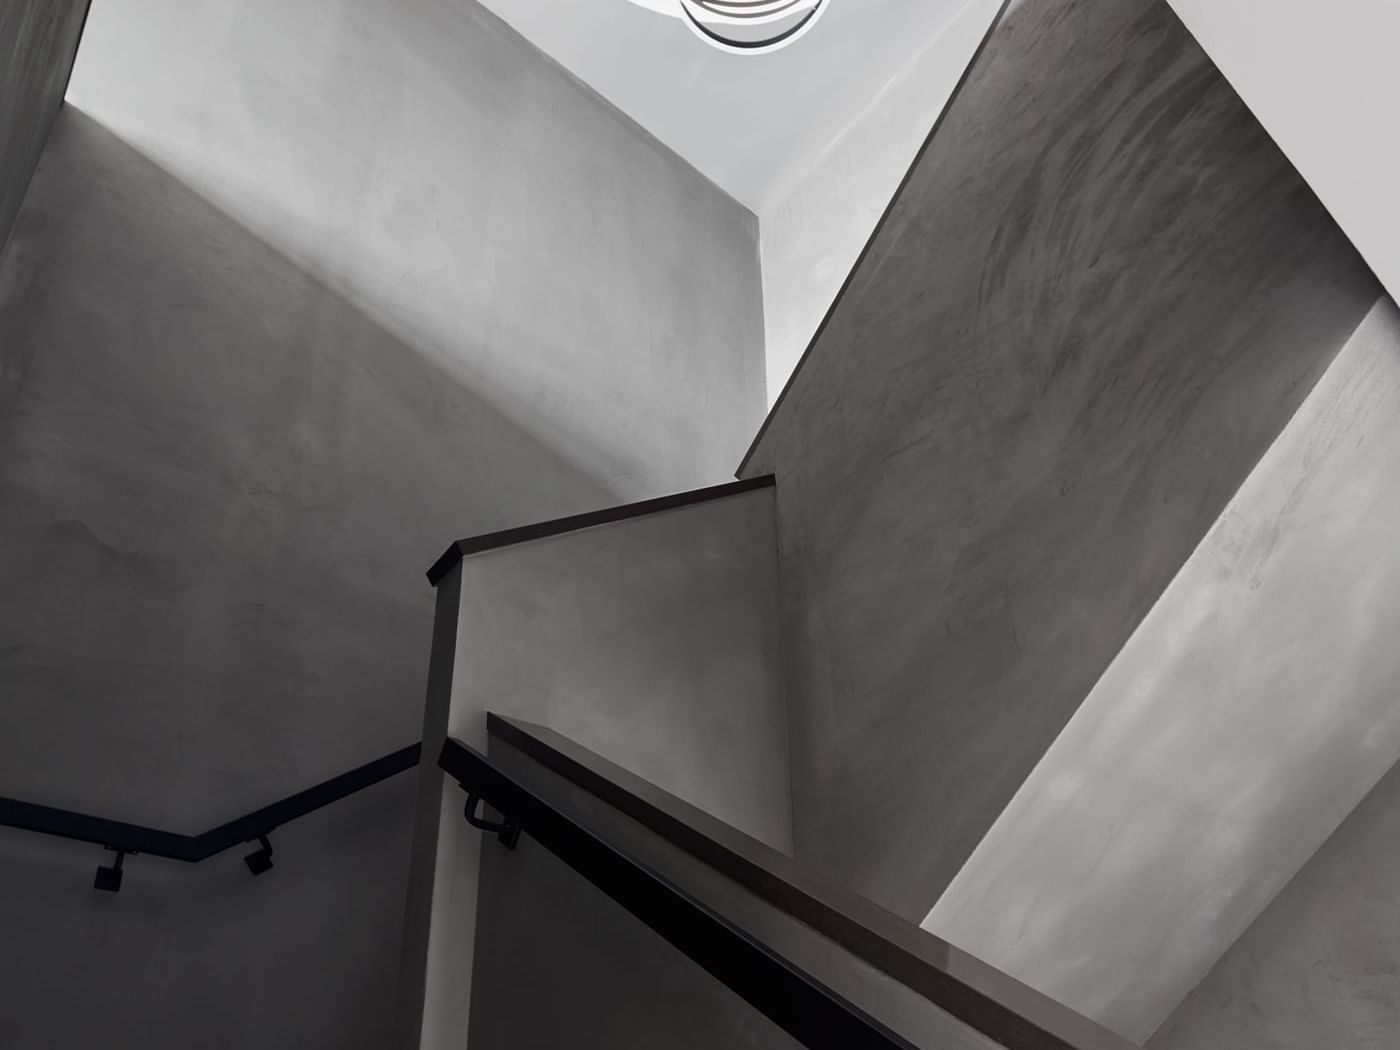 Poliform Penthouse Staircase at Gansevoort Meatpacking NYC